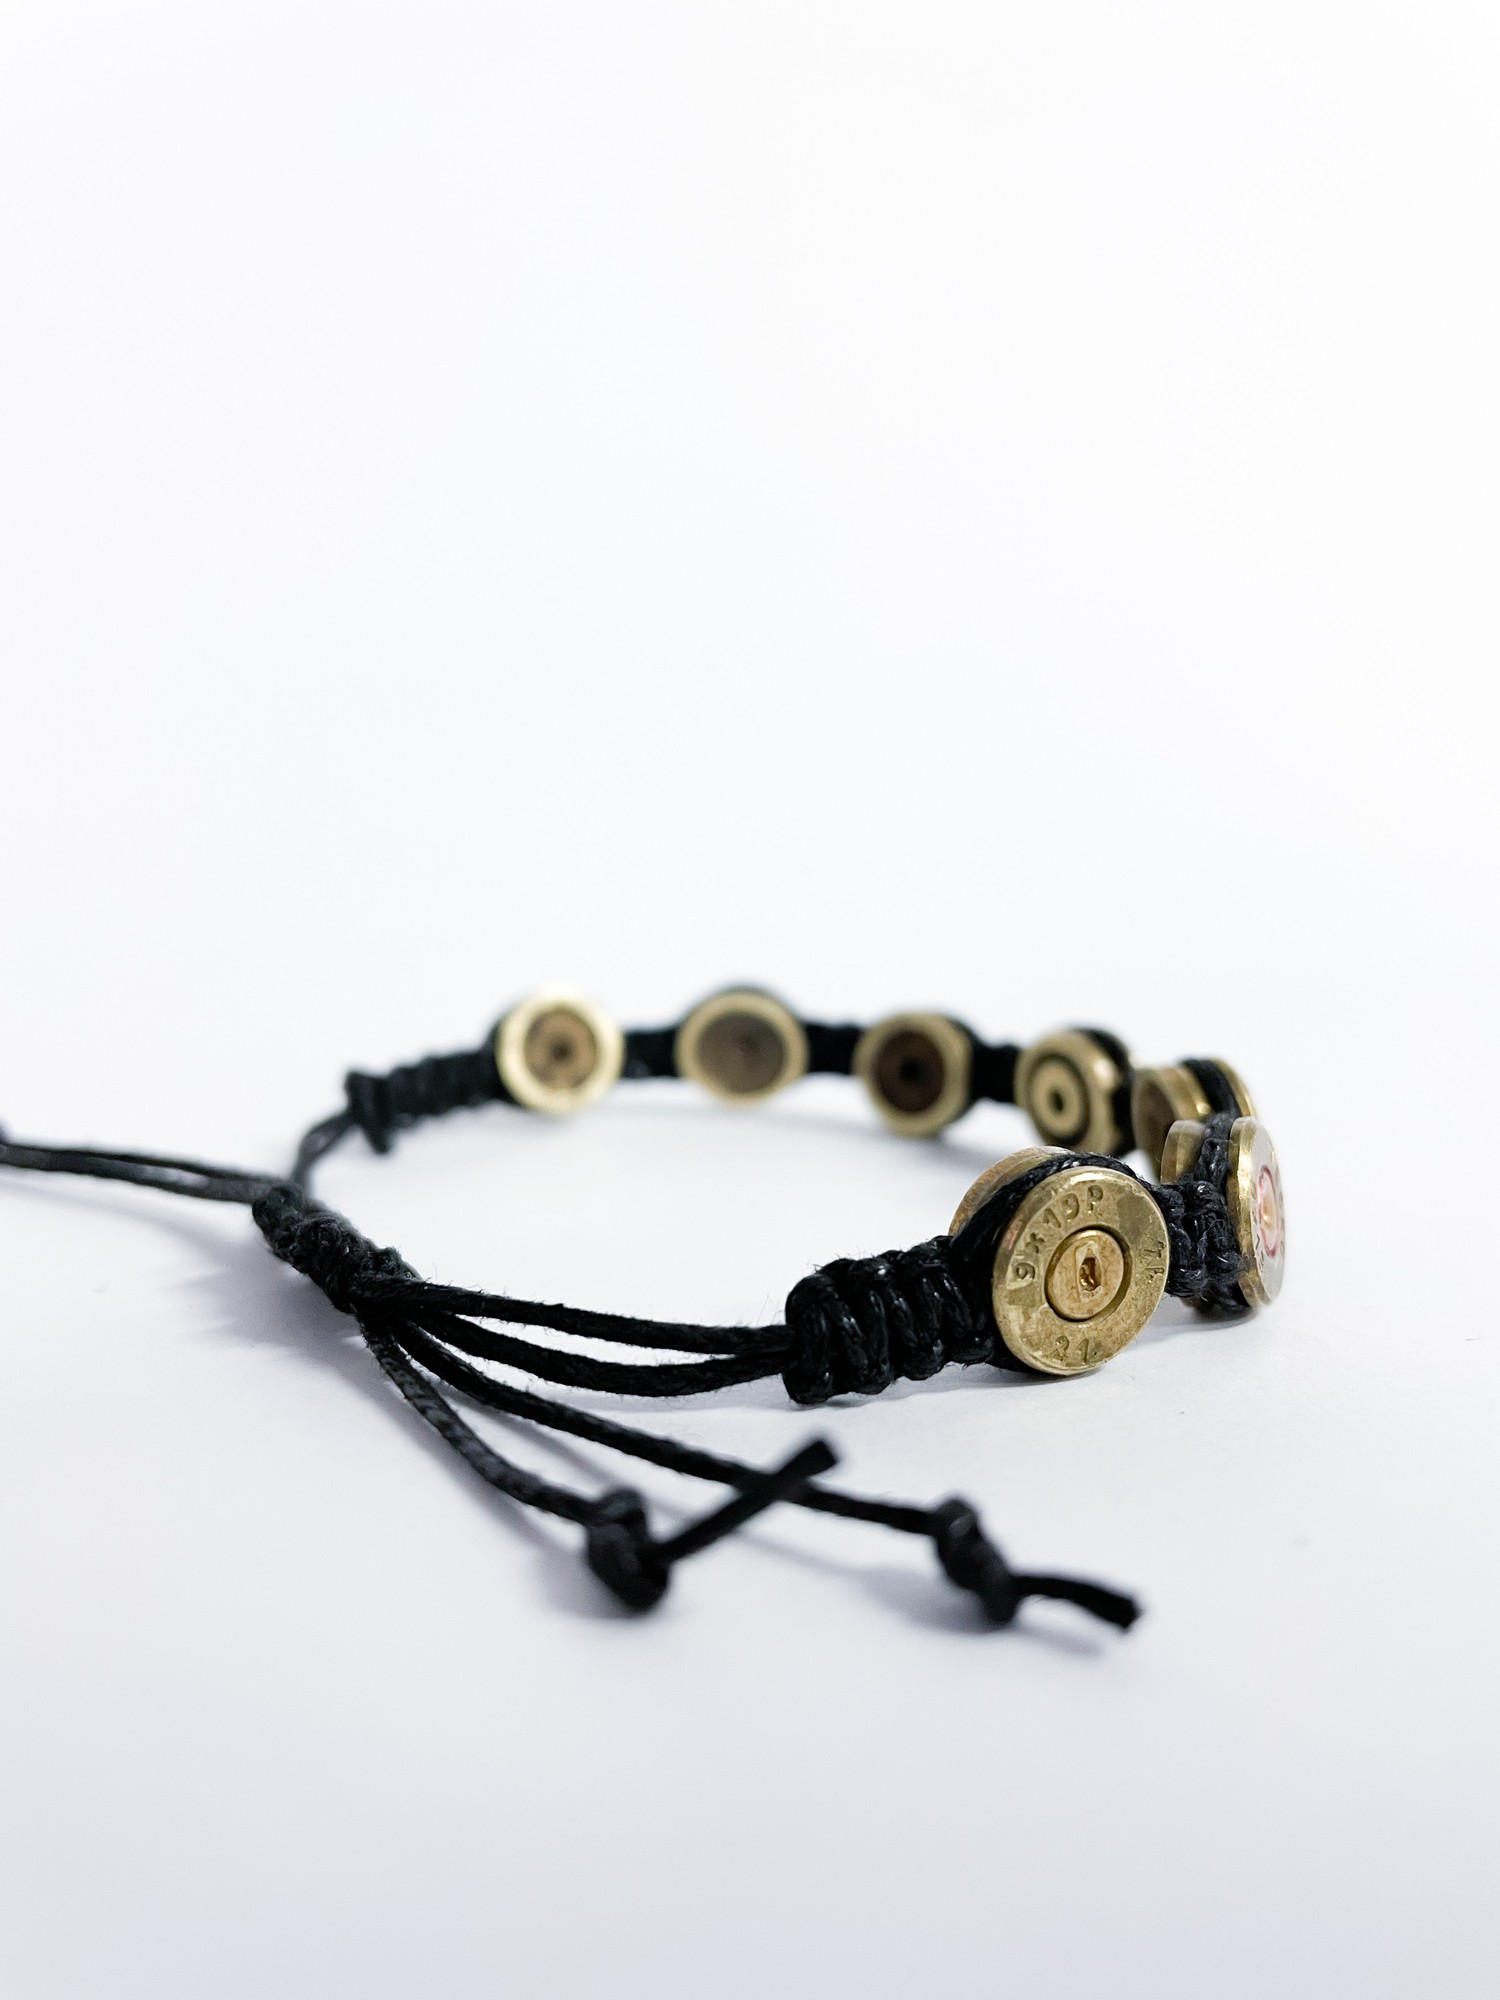 The bracelet is made of spent shell casings